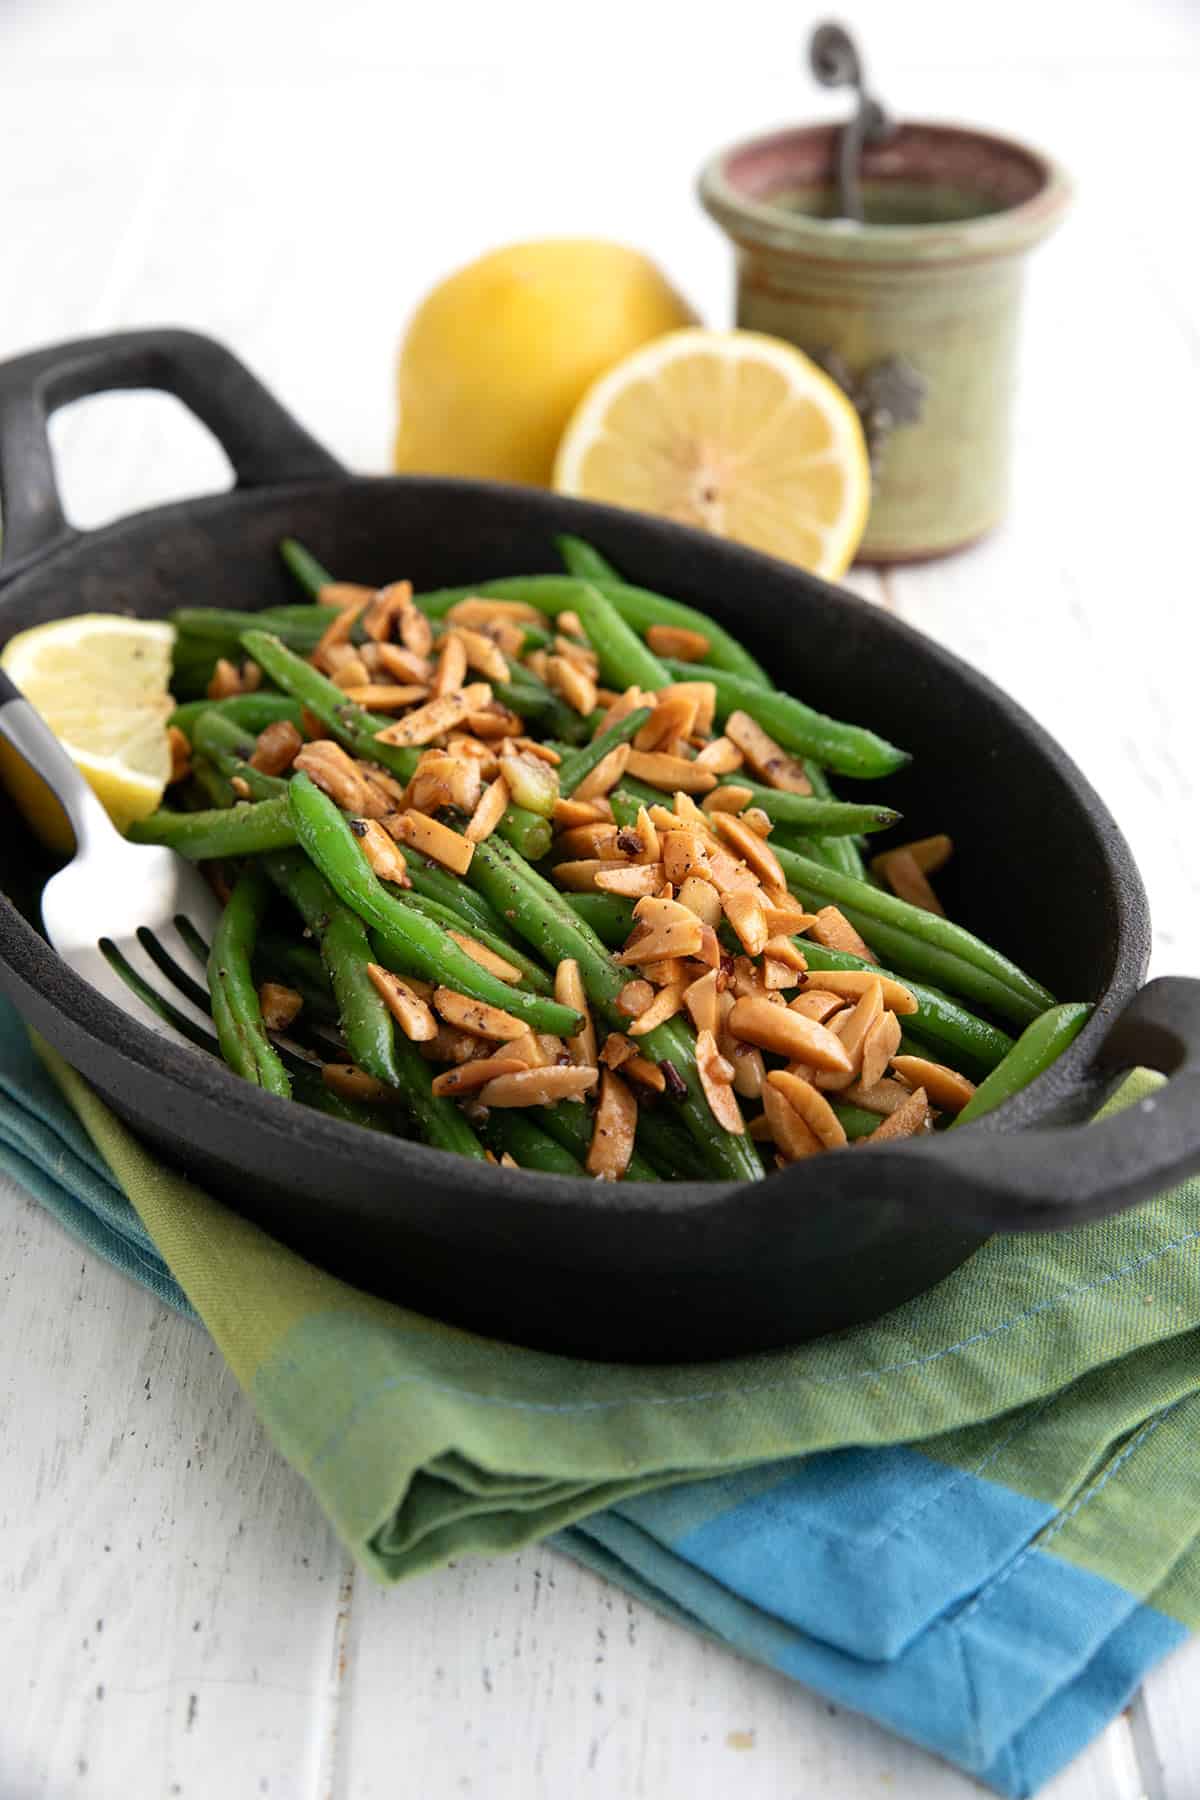 Green Beans Almondine in a black oval dish over a green and blue napkin.